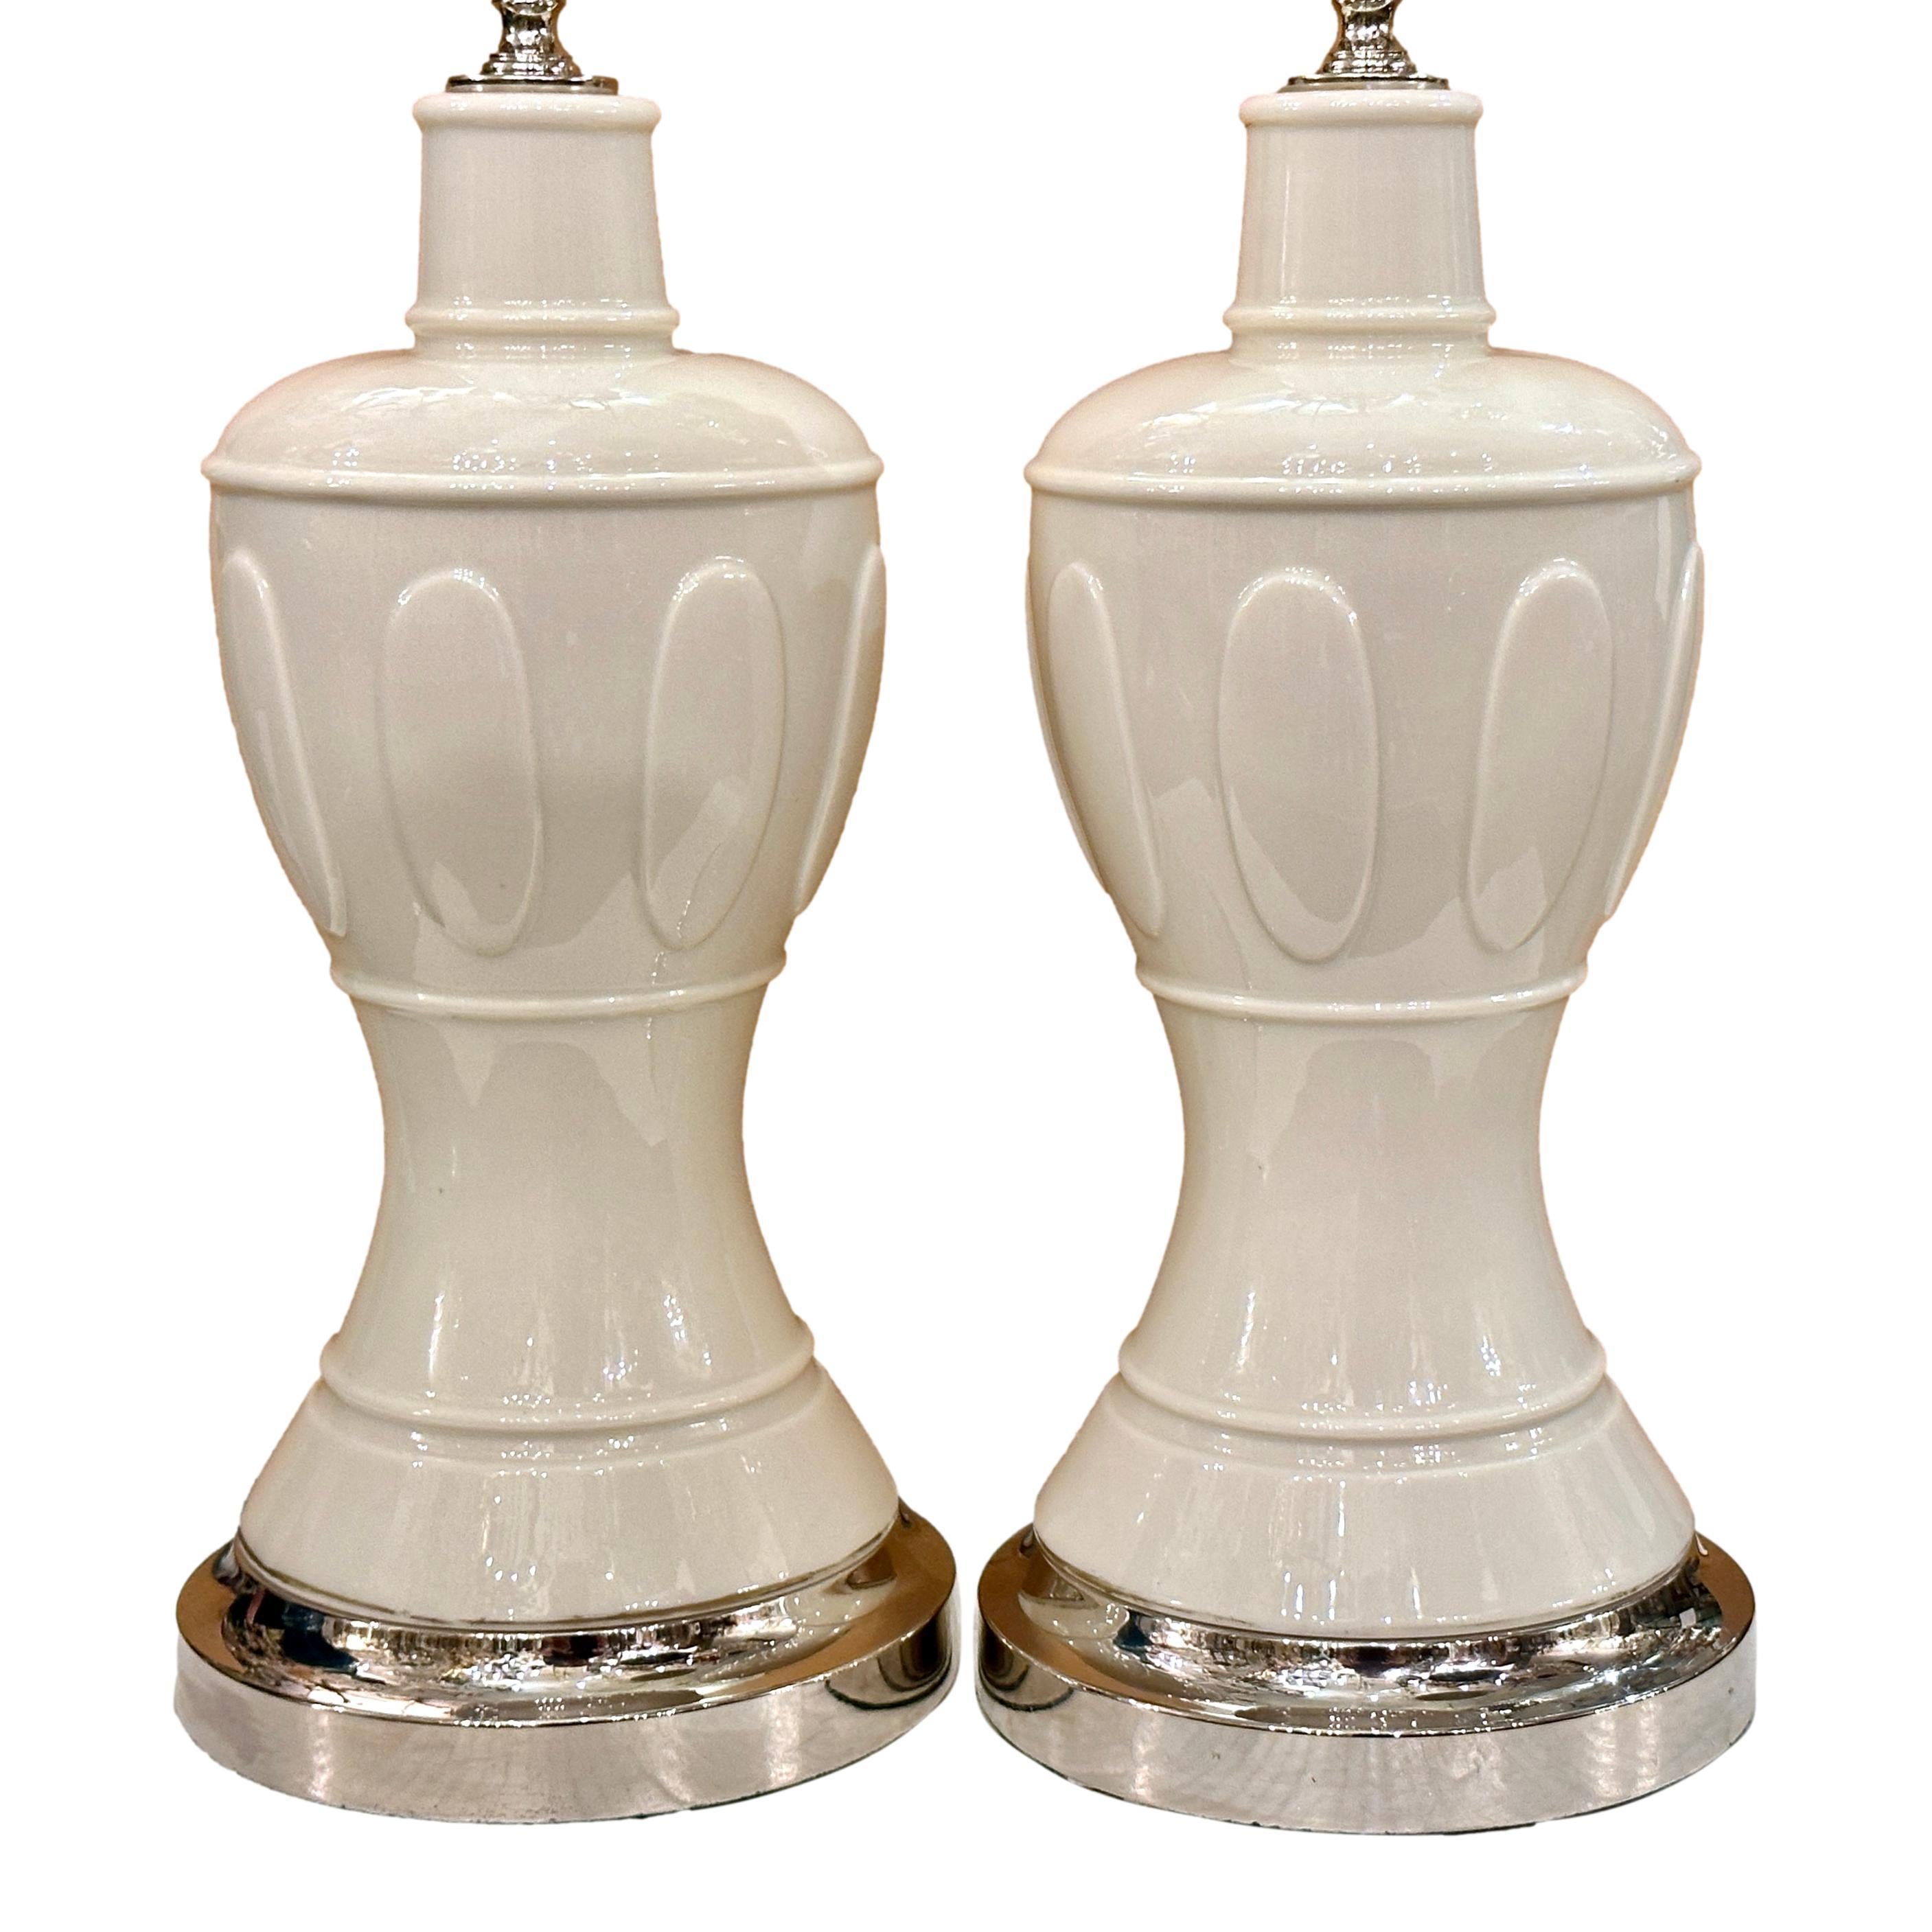 Pair of circa 1950's French porcelain table lamps with silver bases.

Measurements:
Height of body: 16